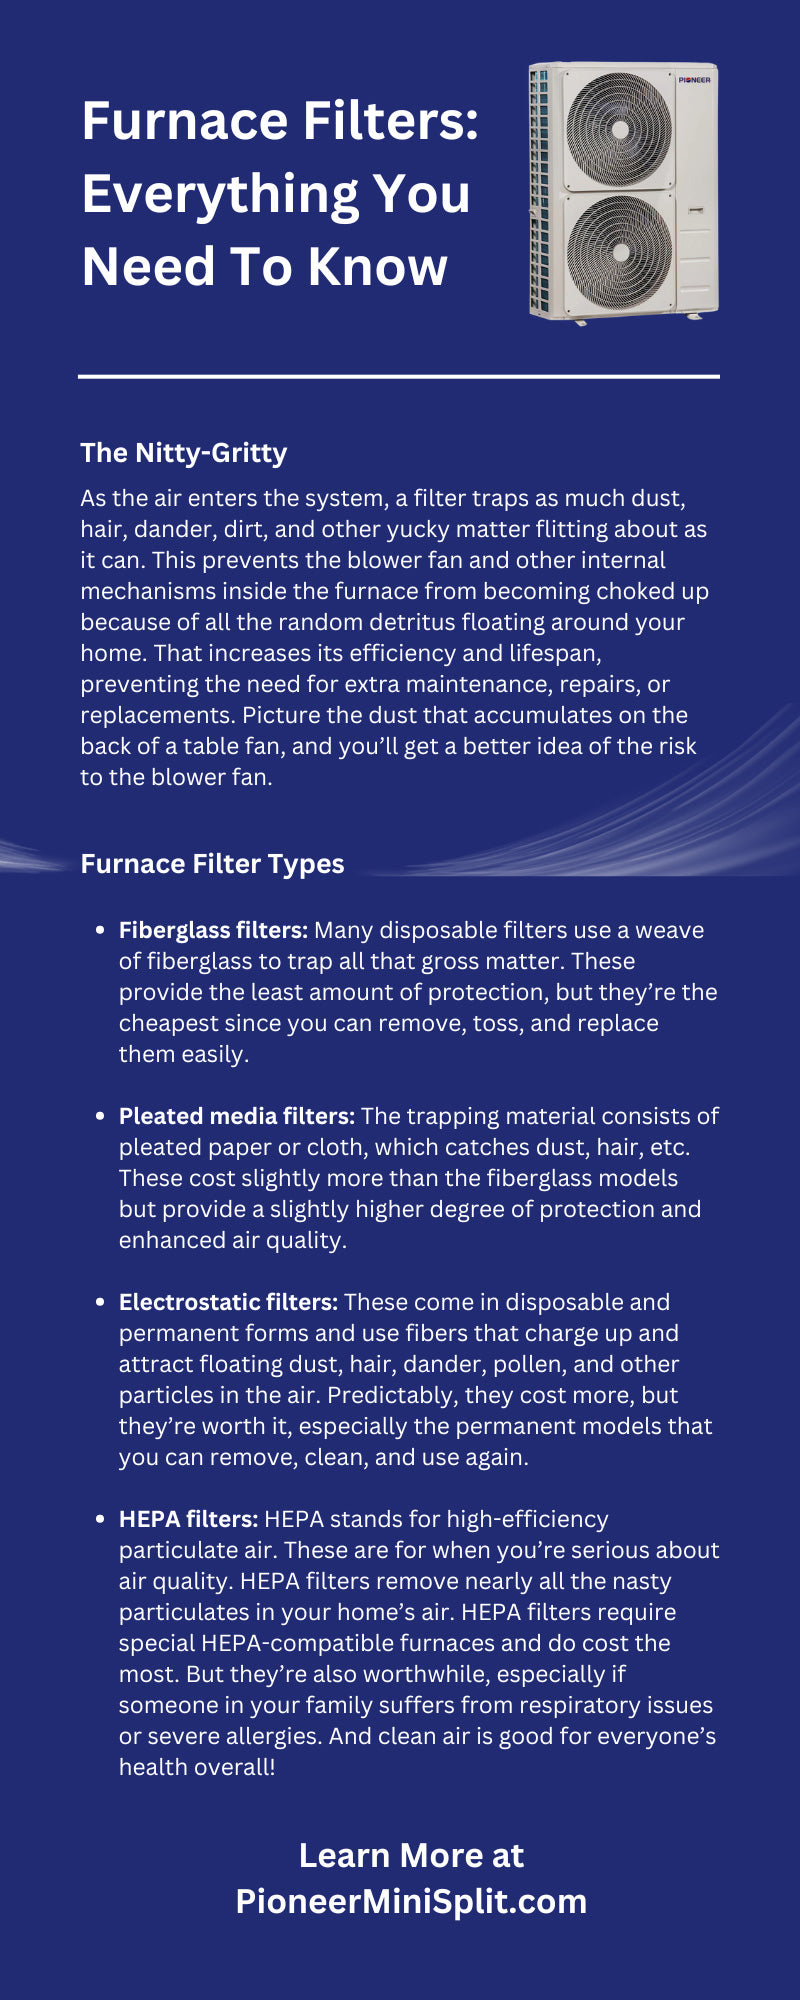 Furnace Filters: Everything You Need To Know